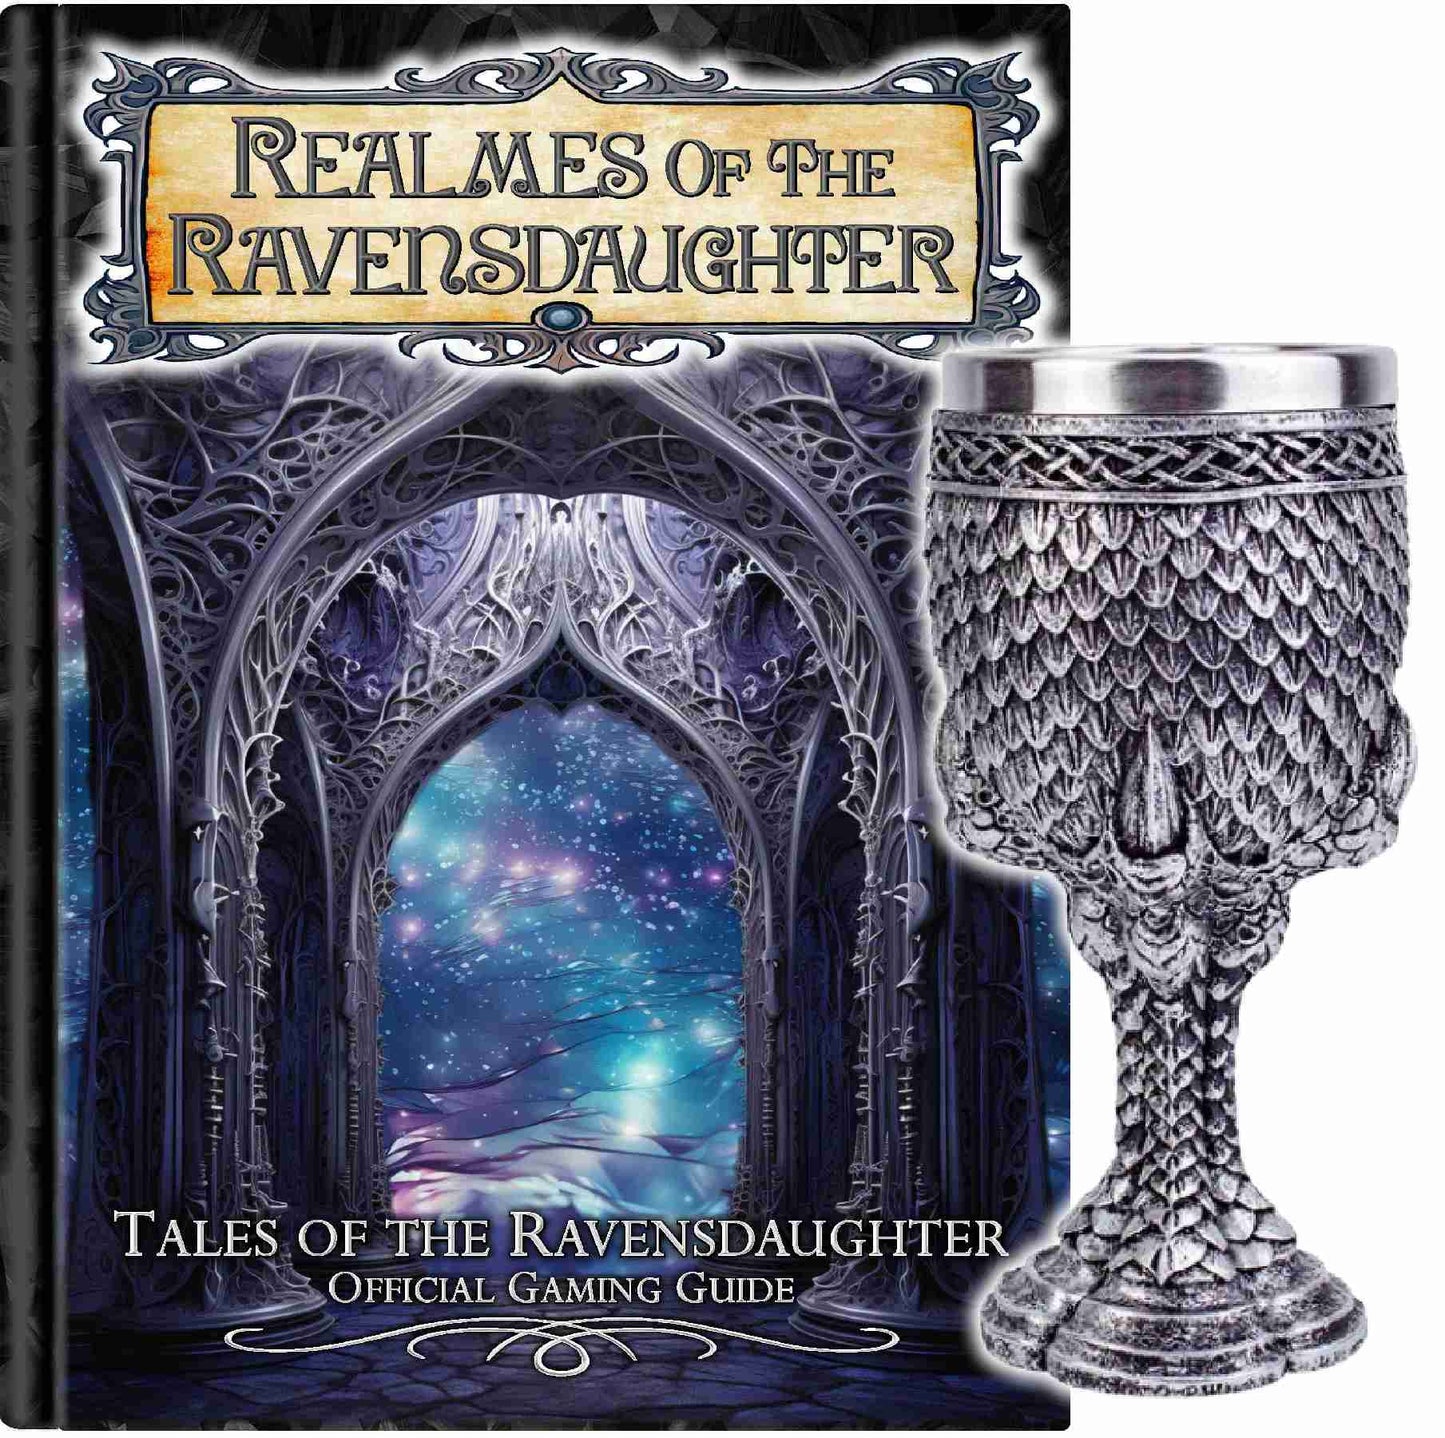 Realmes of the Ravensdaughter RPG Guide PREORDER and DragonScale Chalice